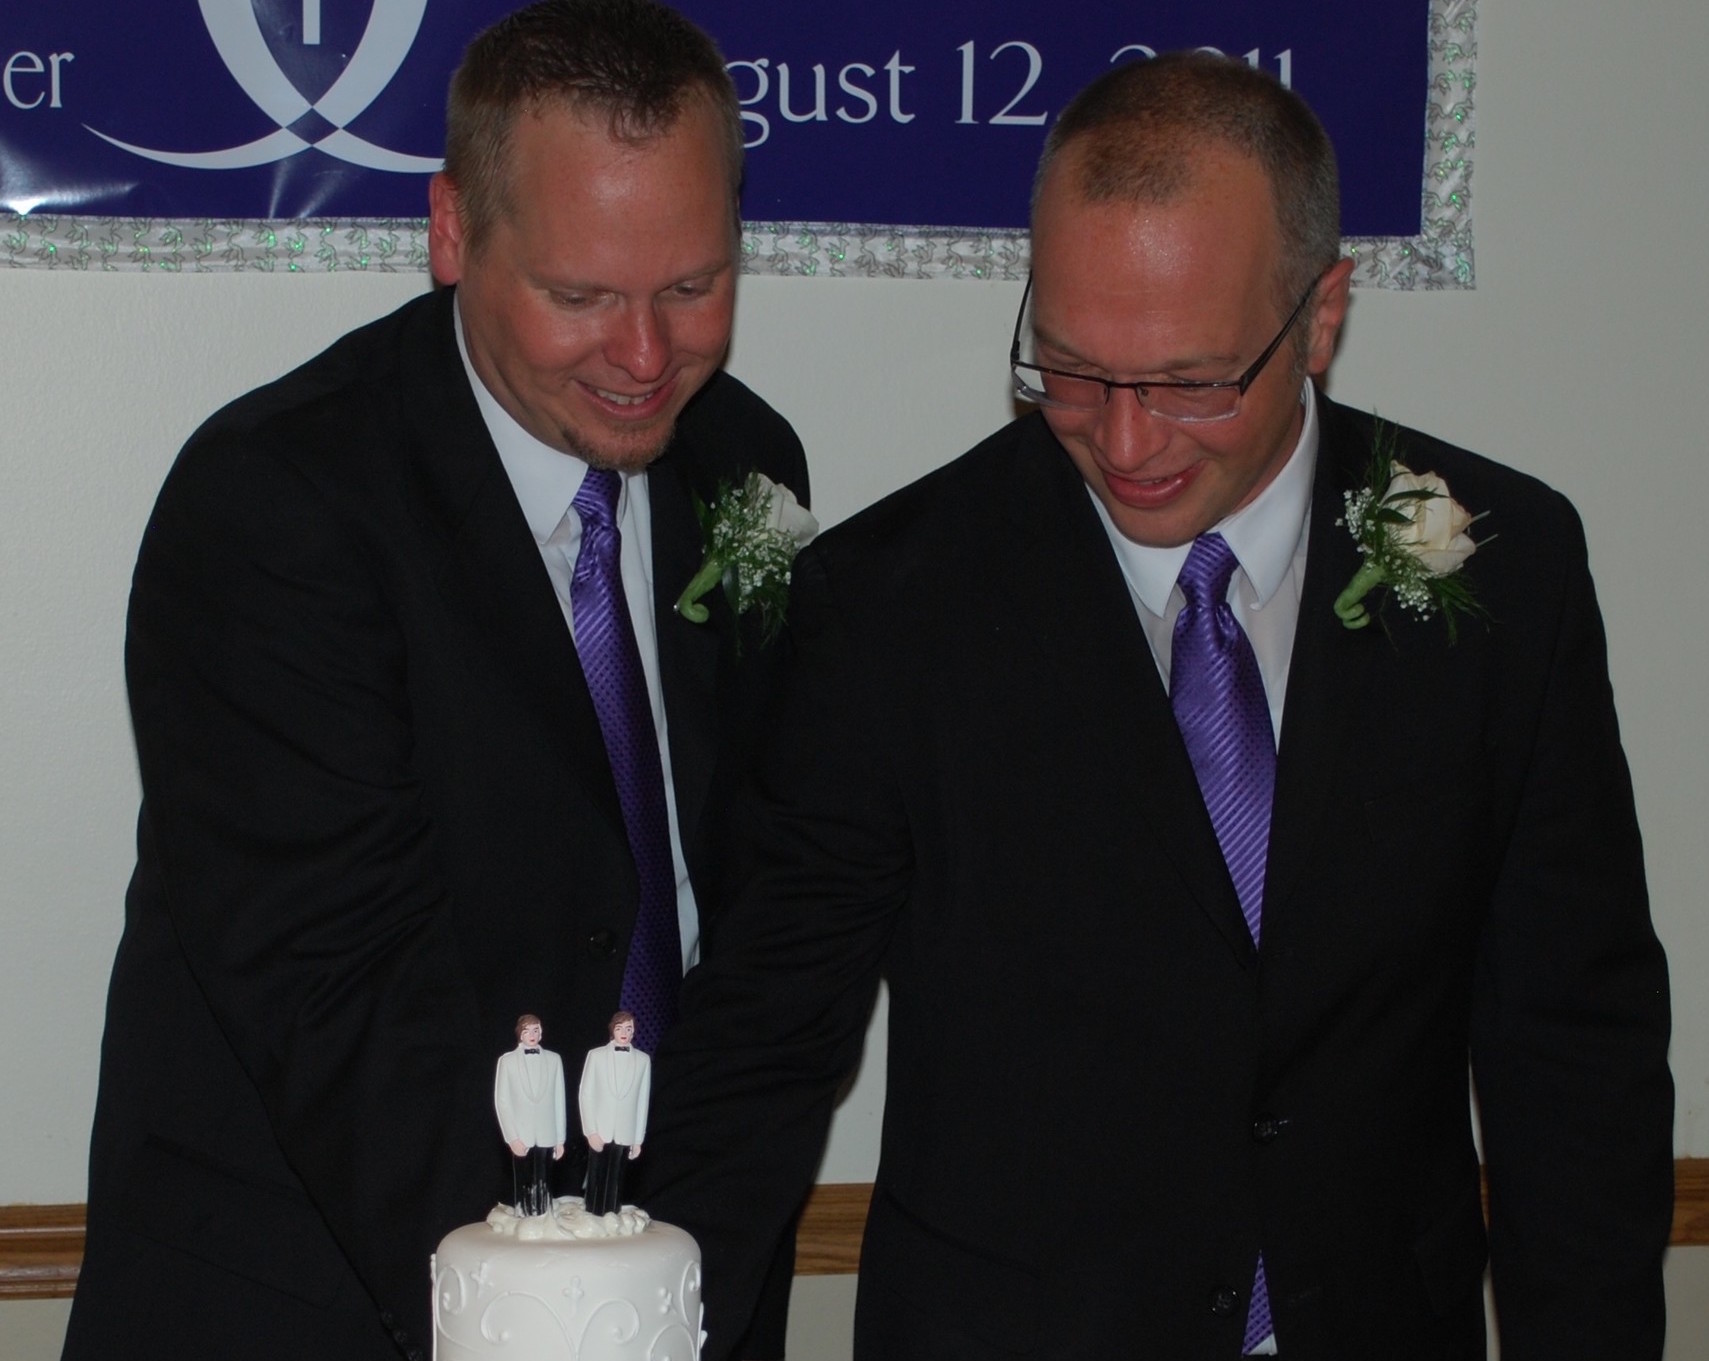 The Rev. Christopher Hofer, left, married Kerry Brady in August 2011 at the Church of St. Jude in Wantagh.